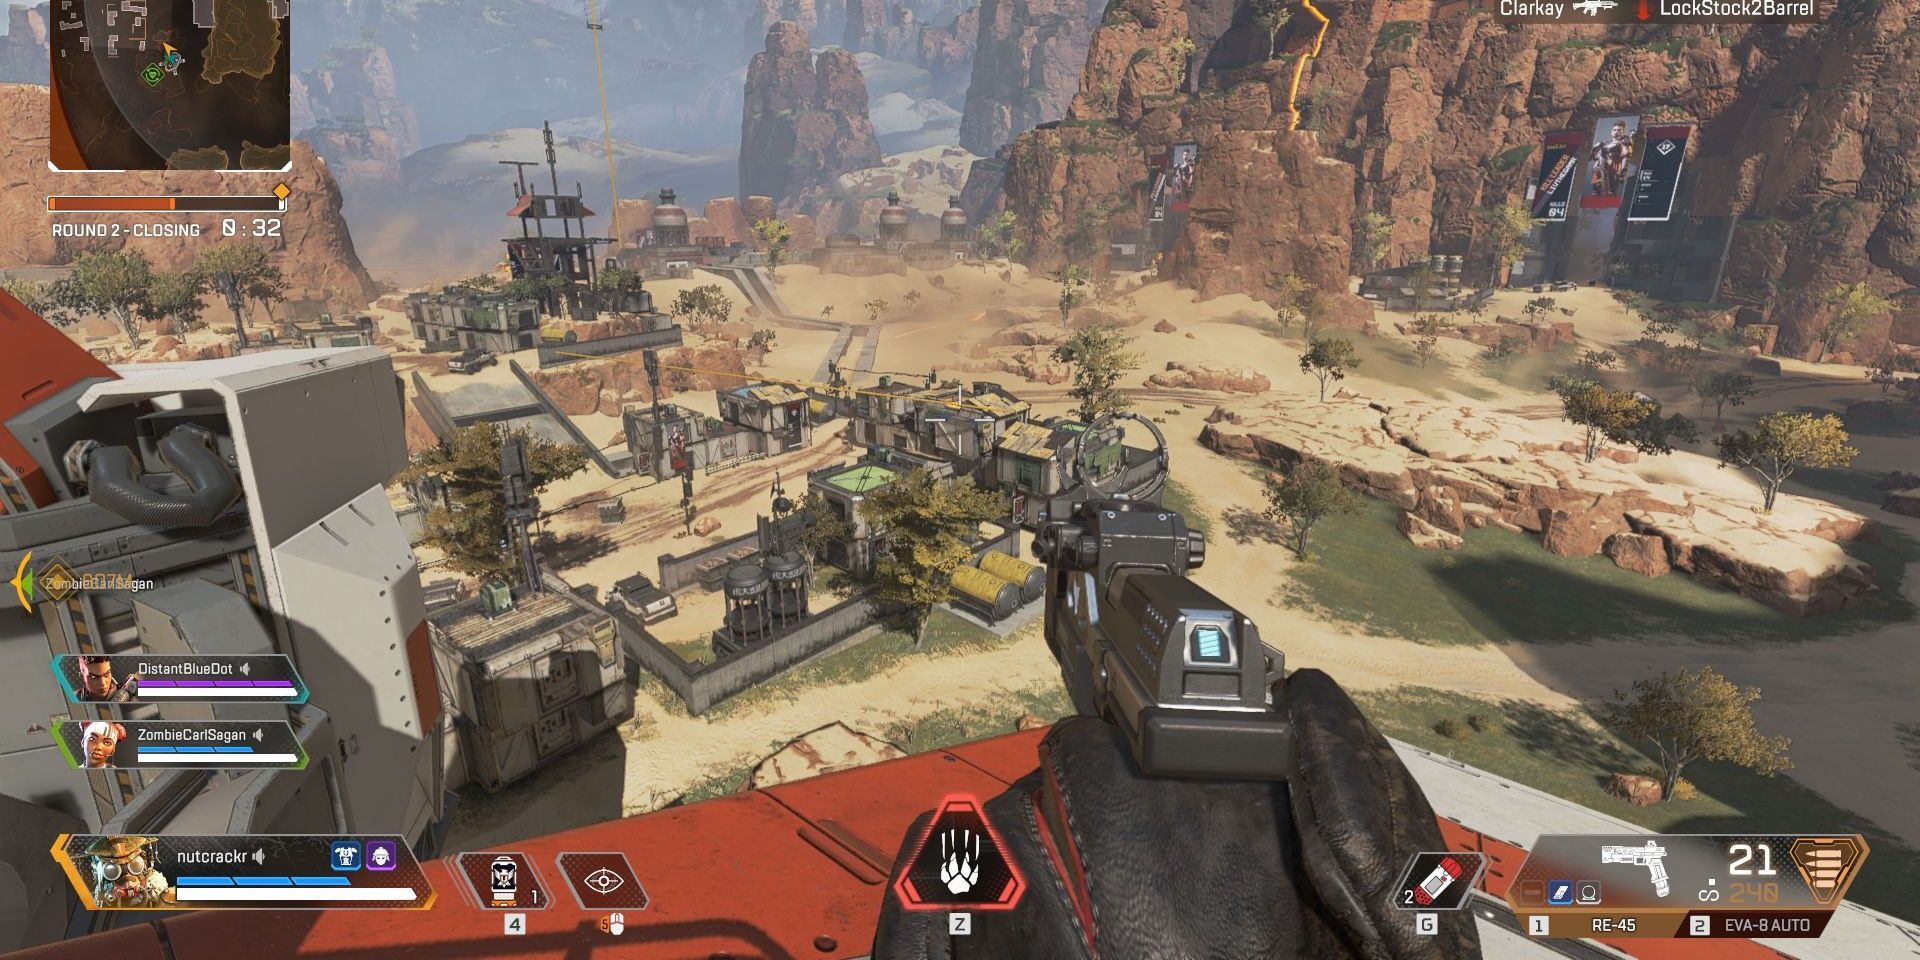 A screenshot showing gameplay in Apex Legends